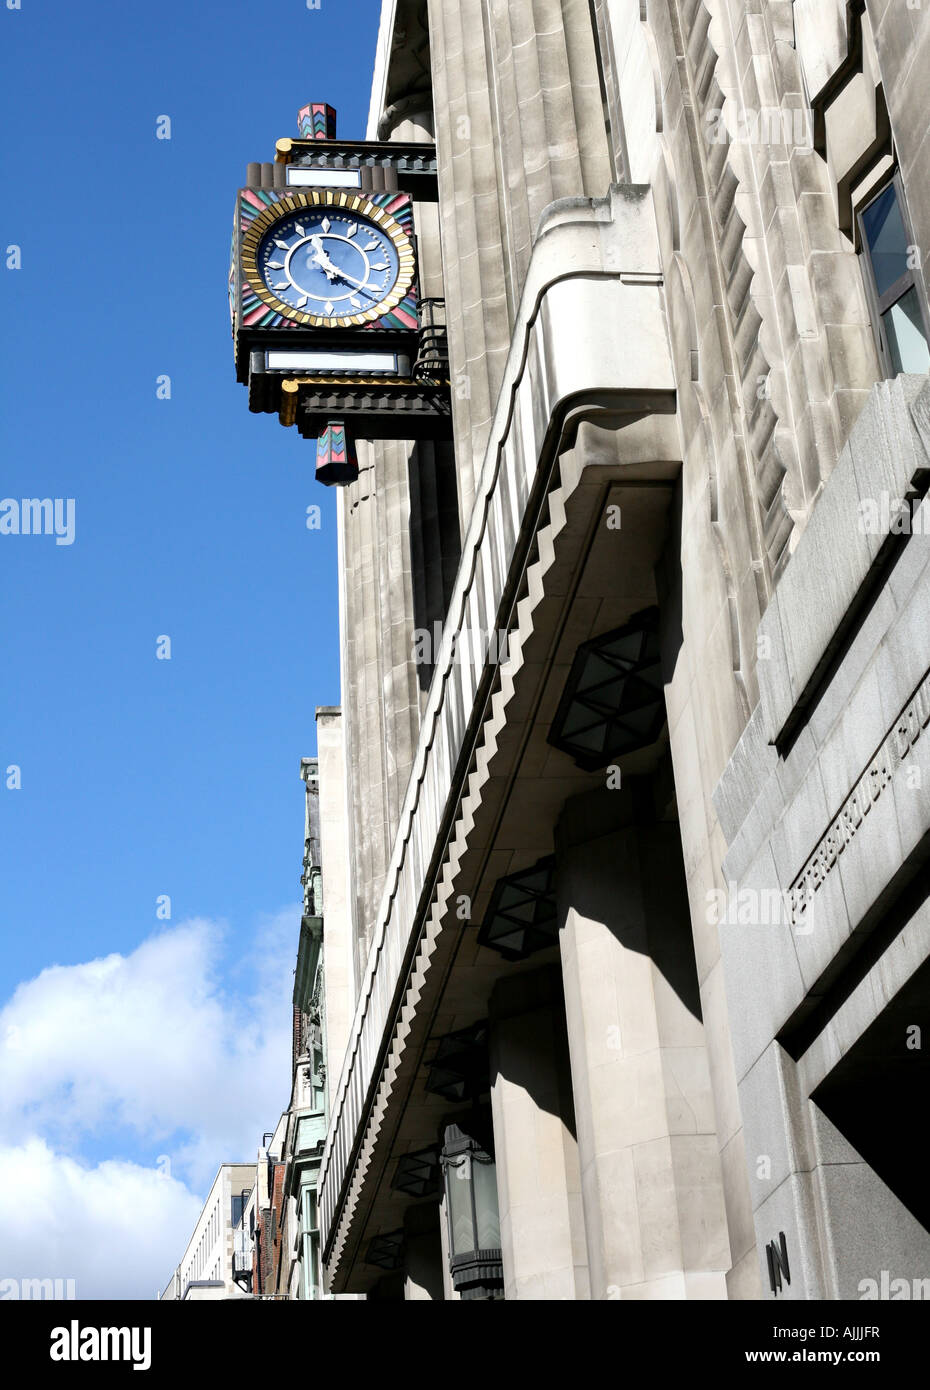 Former Daily Telegraph building in Fleet Street London now home to Goldman Sachs Stock Photo